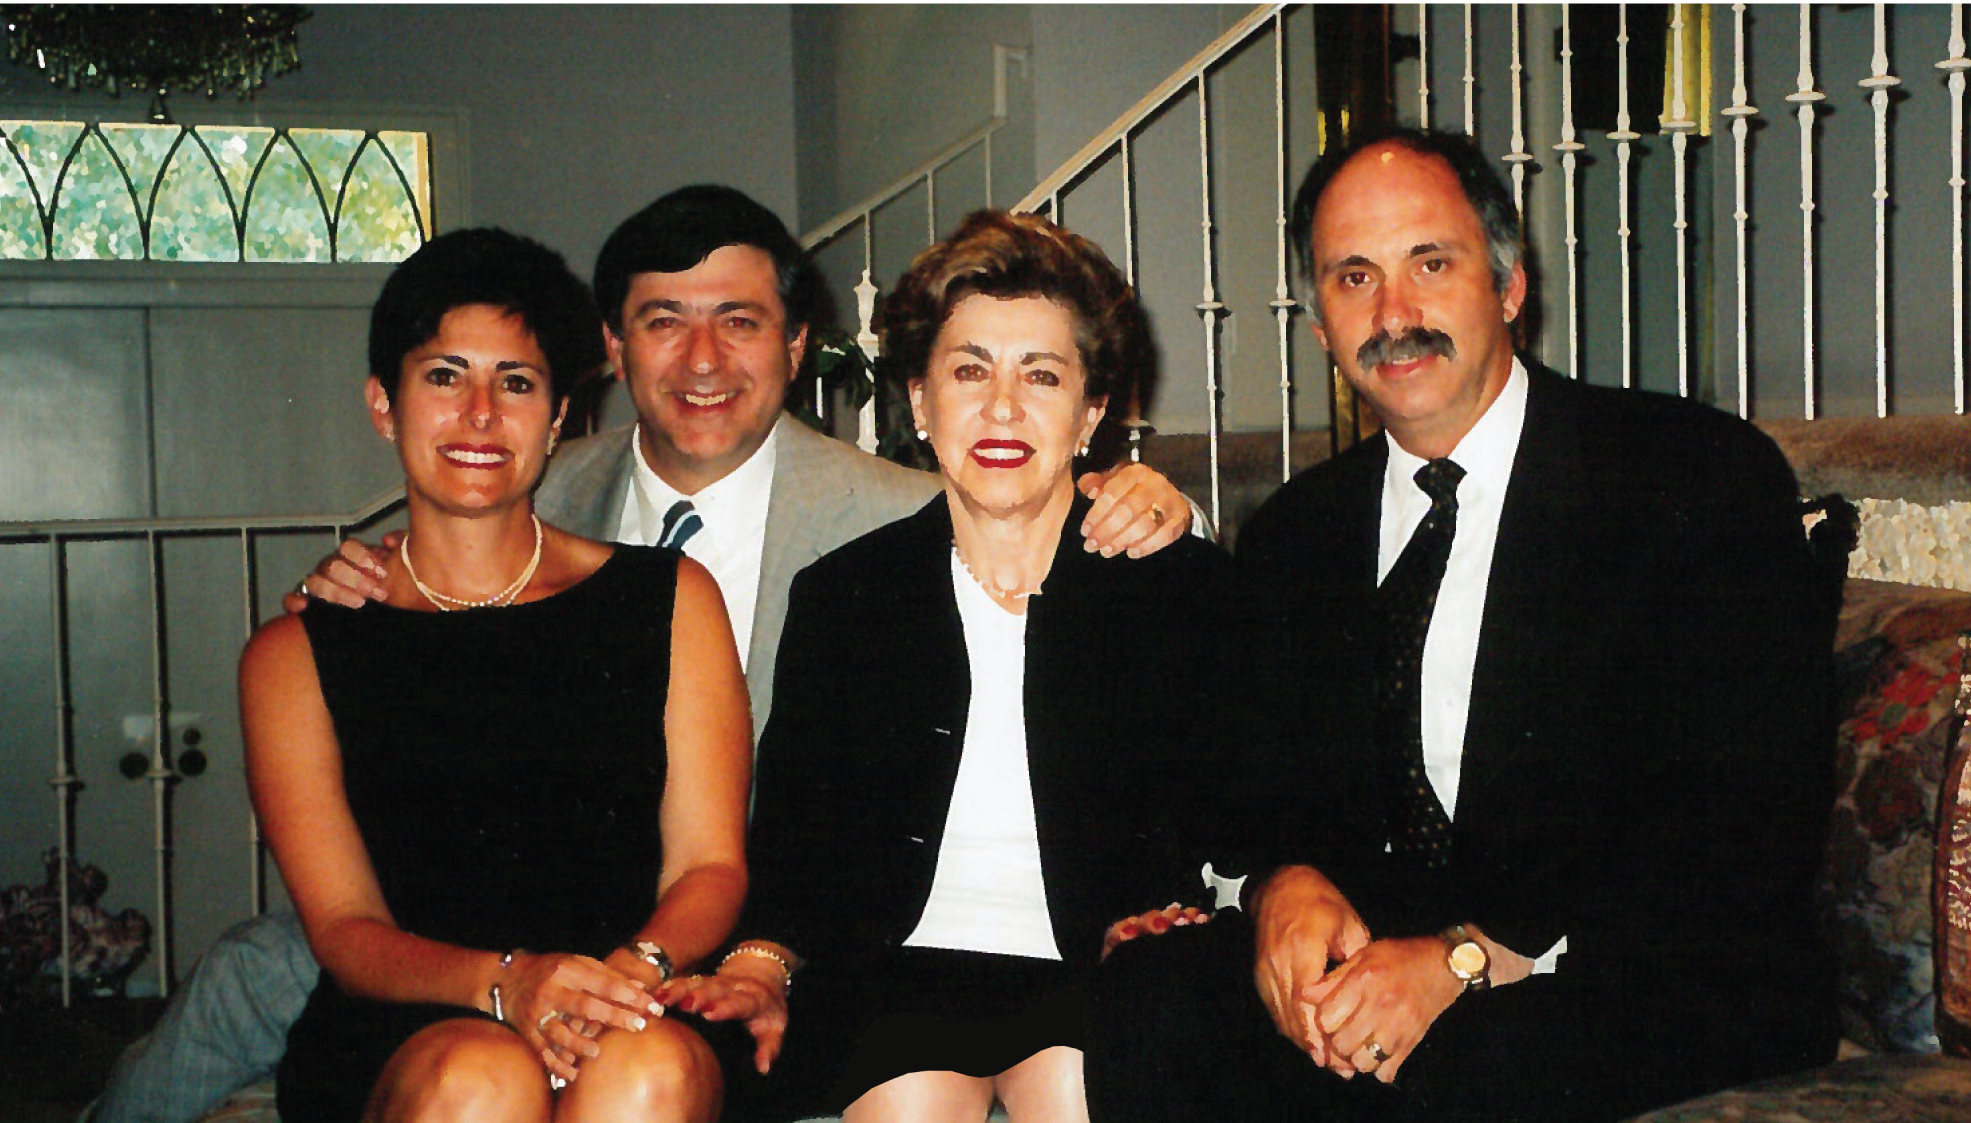 Bluma and Felix raised three children in Columbia — Henry, Karl, and Esther. This photo from 2003 shows Henry, Karl, and Esther with Bluma inside her home shortly after Felix’s passing. 